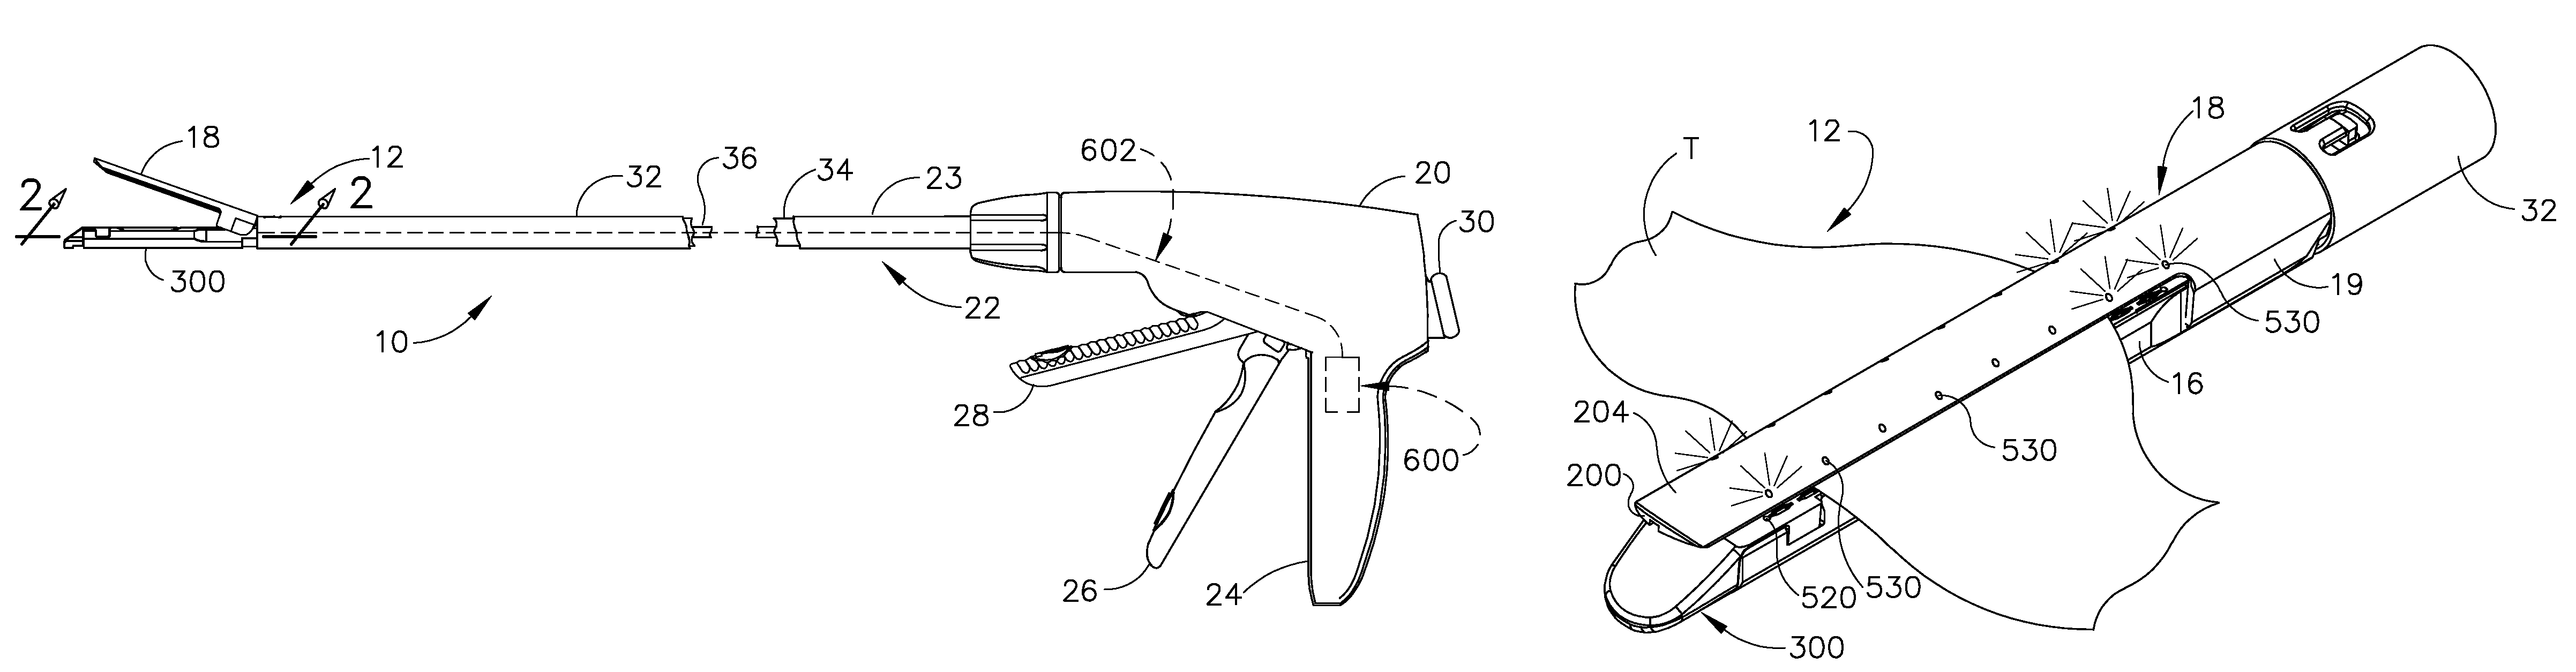 End effector for use with a surgical cutting and stapling instrument